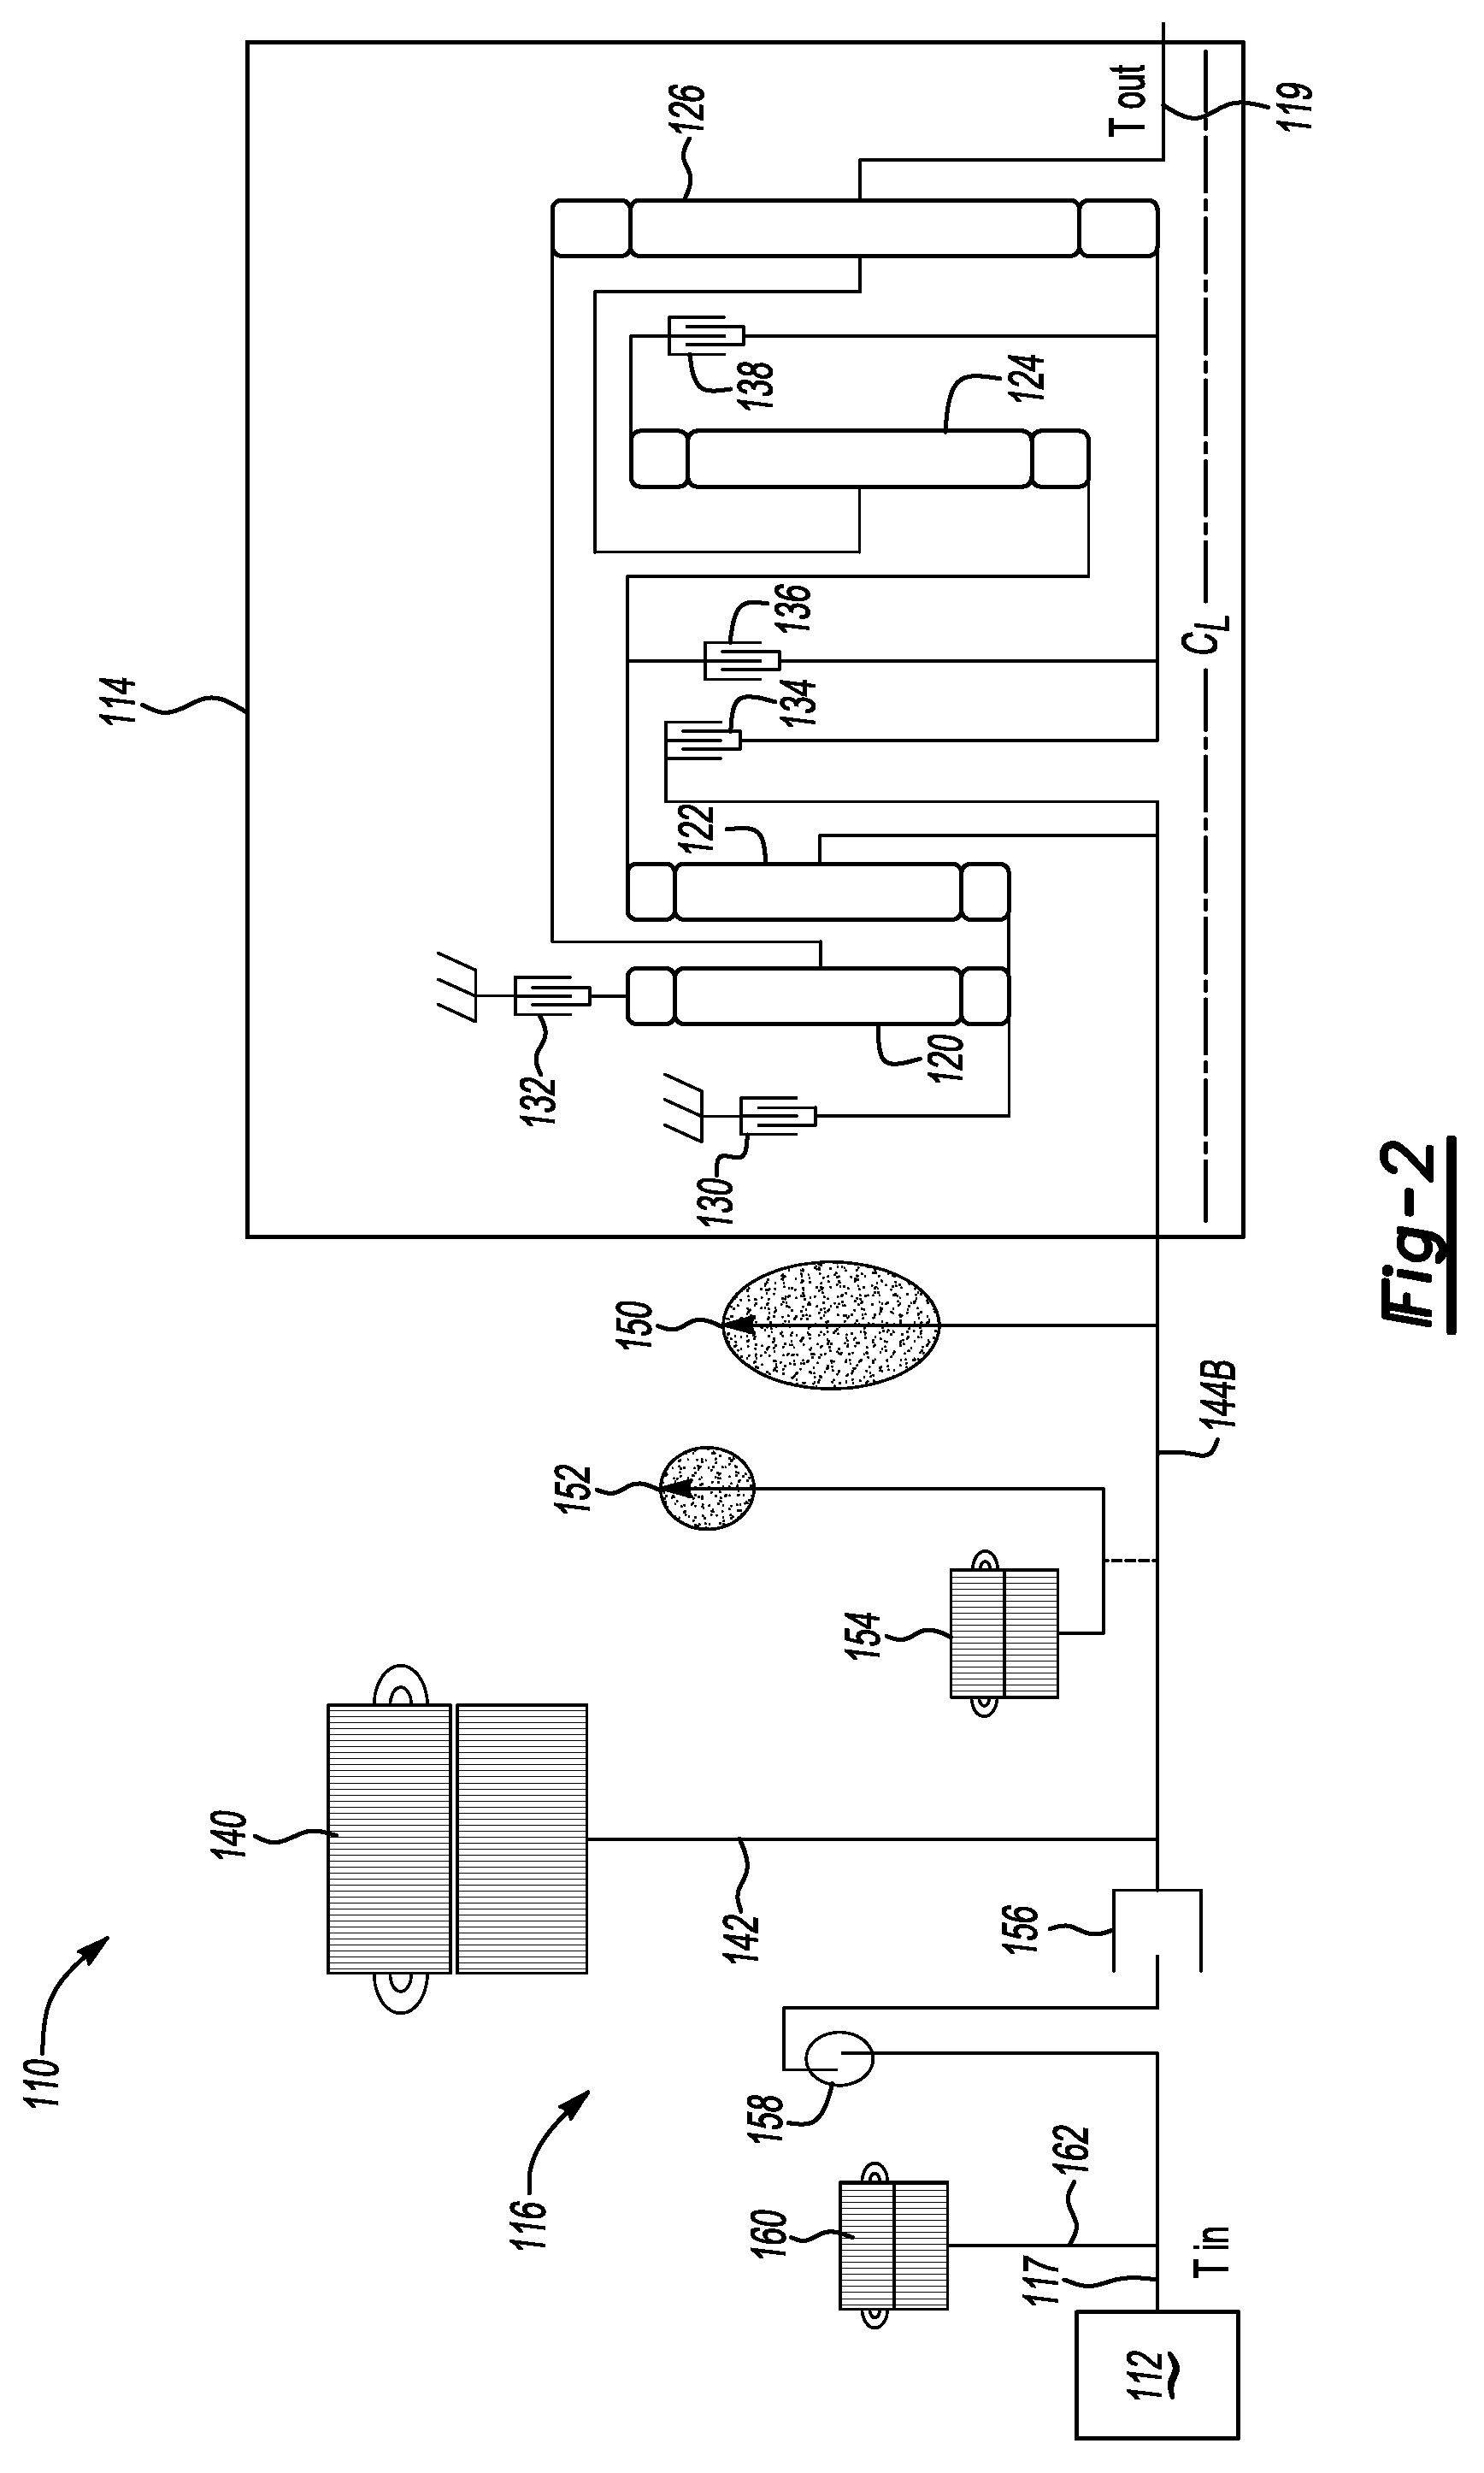 Apparatus and method for a quick start engine and hybrid system